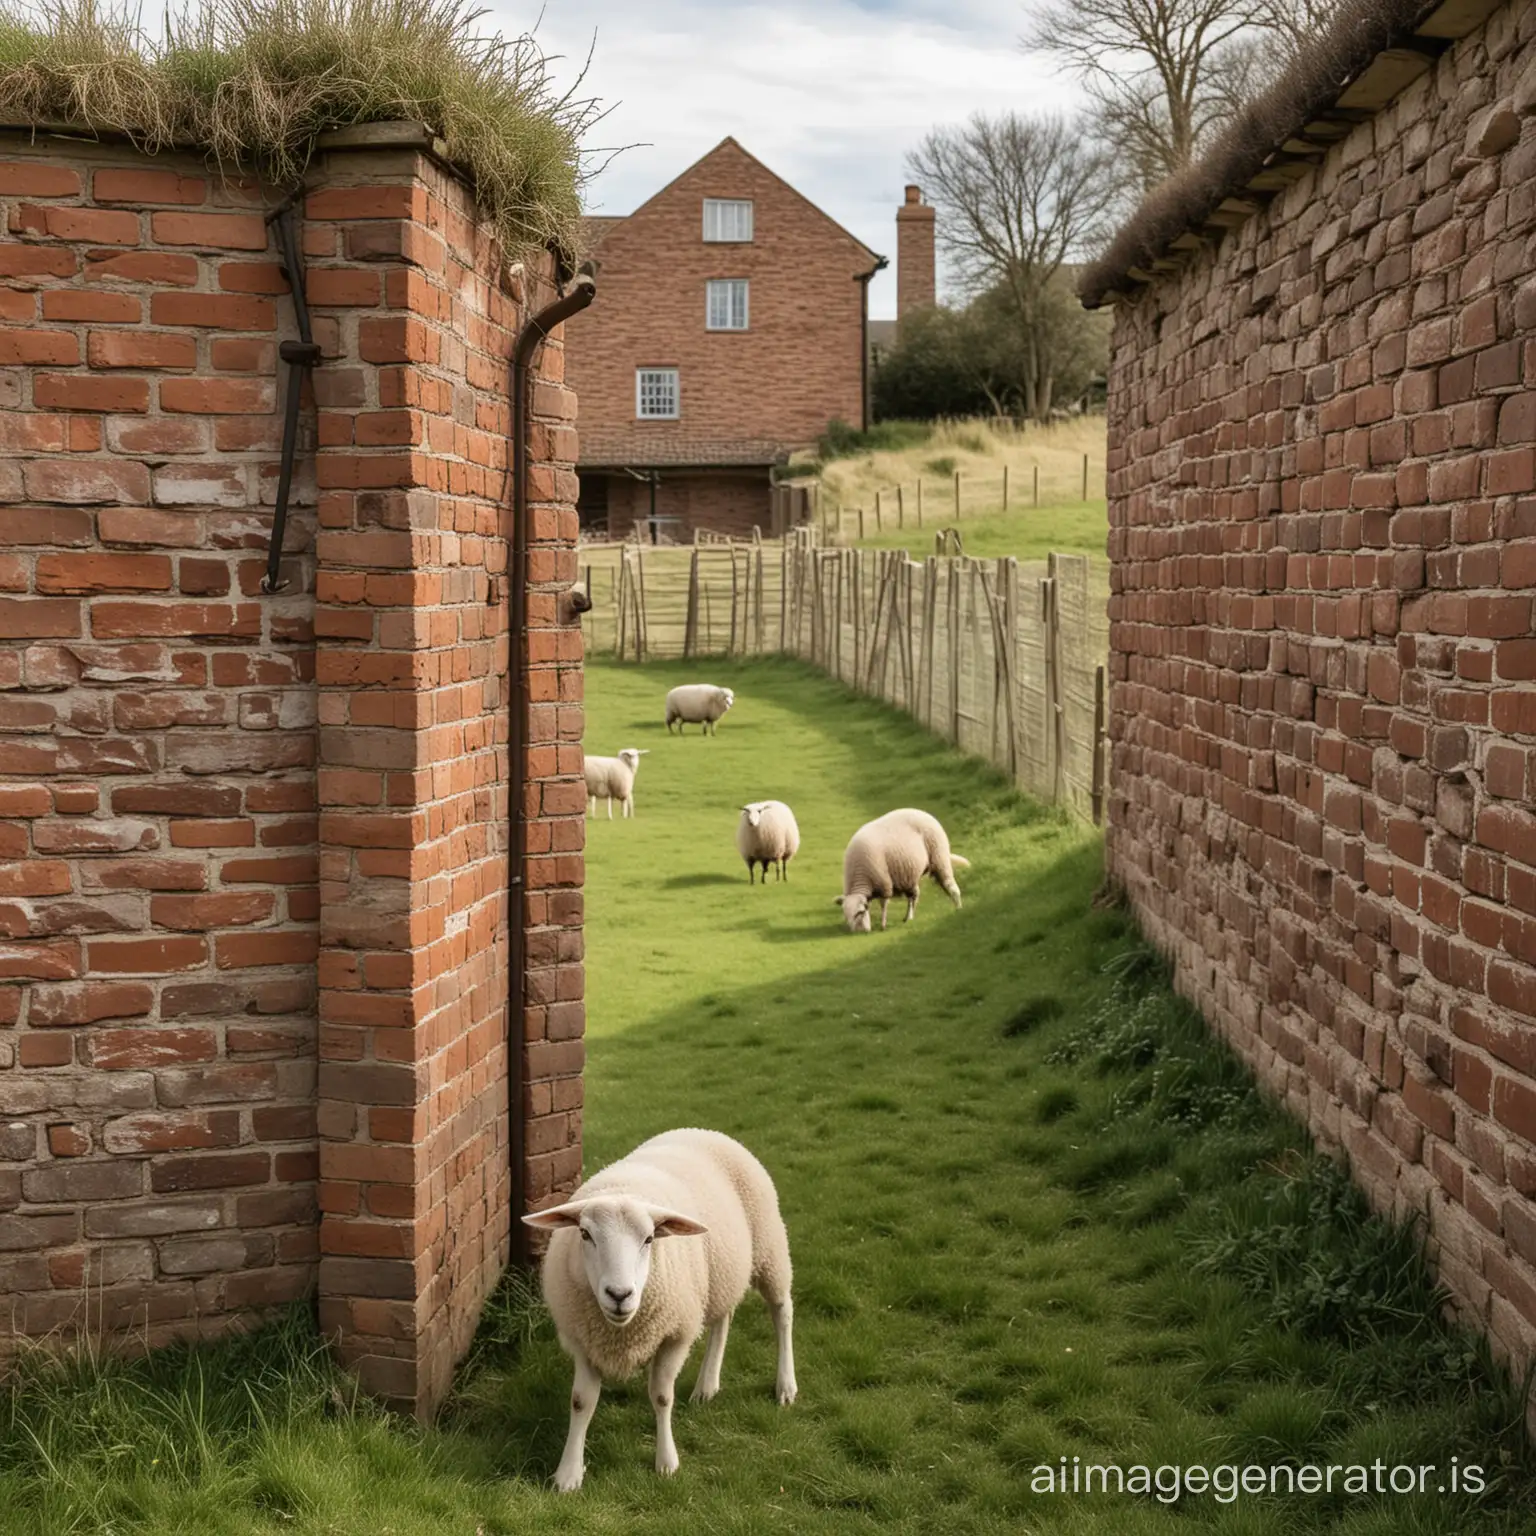 Sheep-Peeking-Behind-Brick-Wall-as-Butcher-Stands-Ready-with-Knife